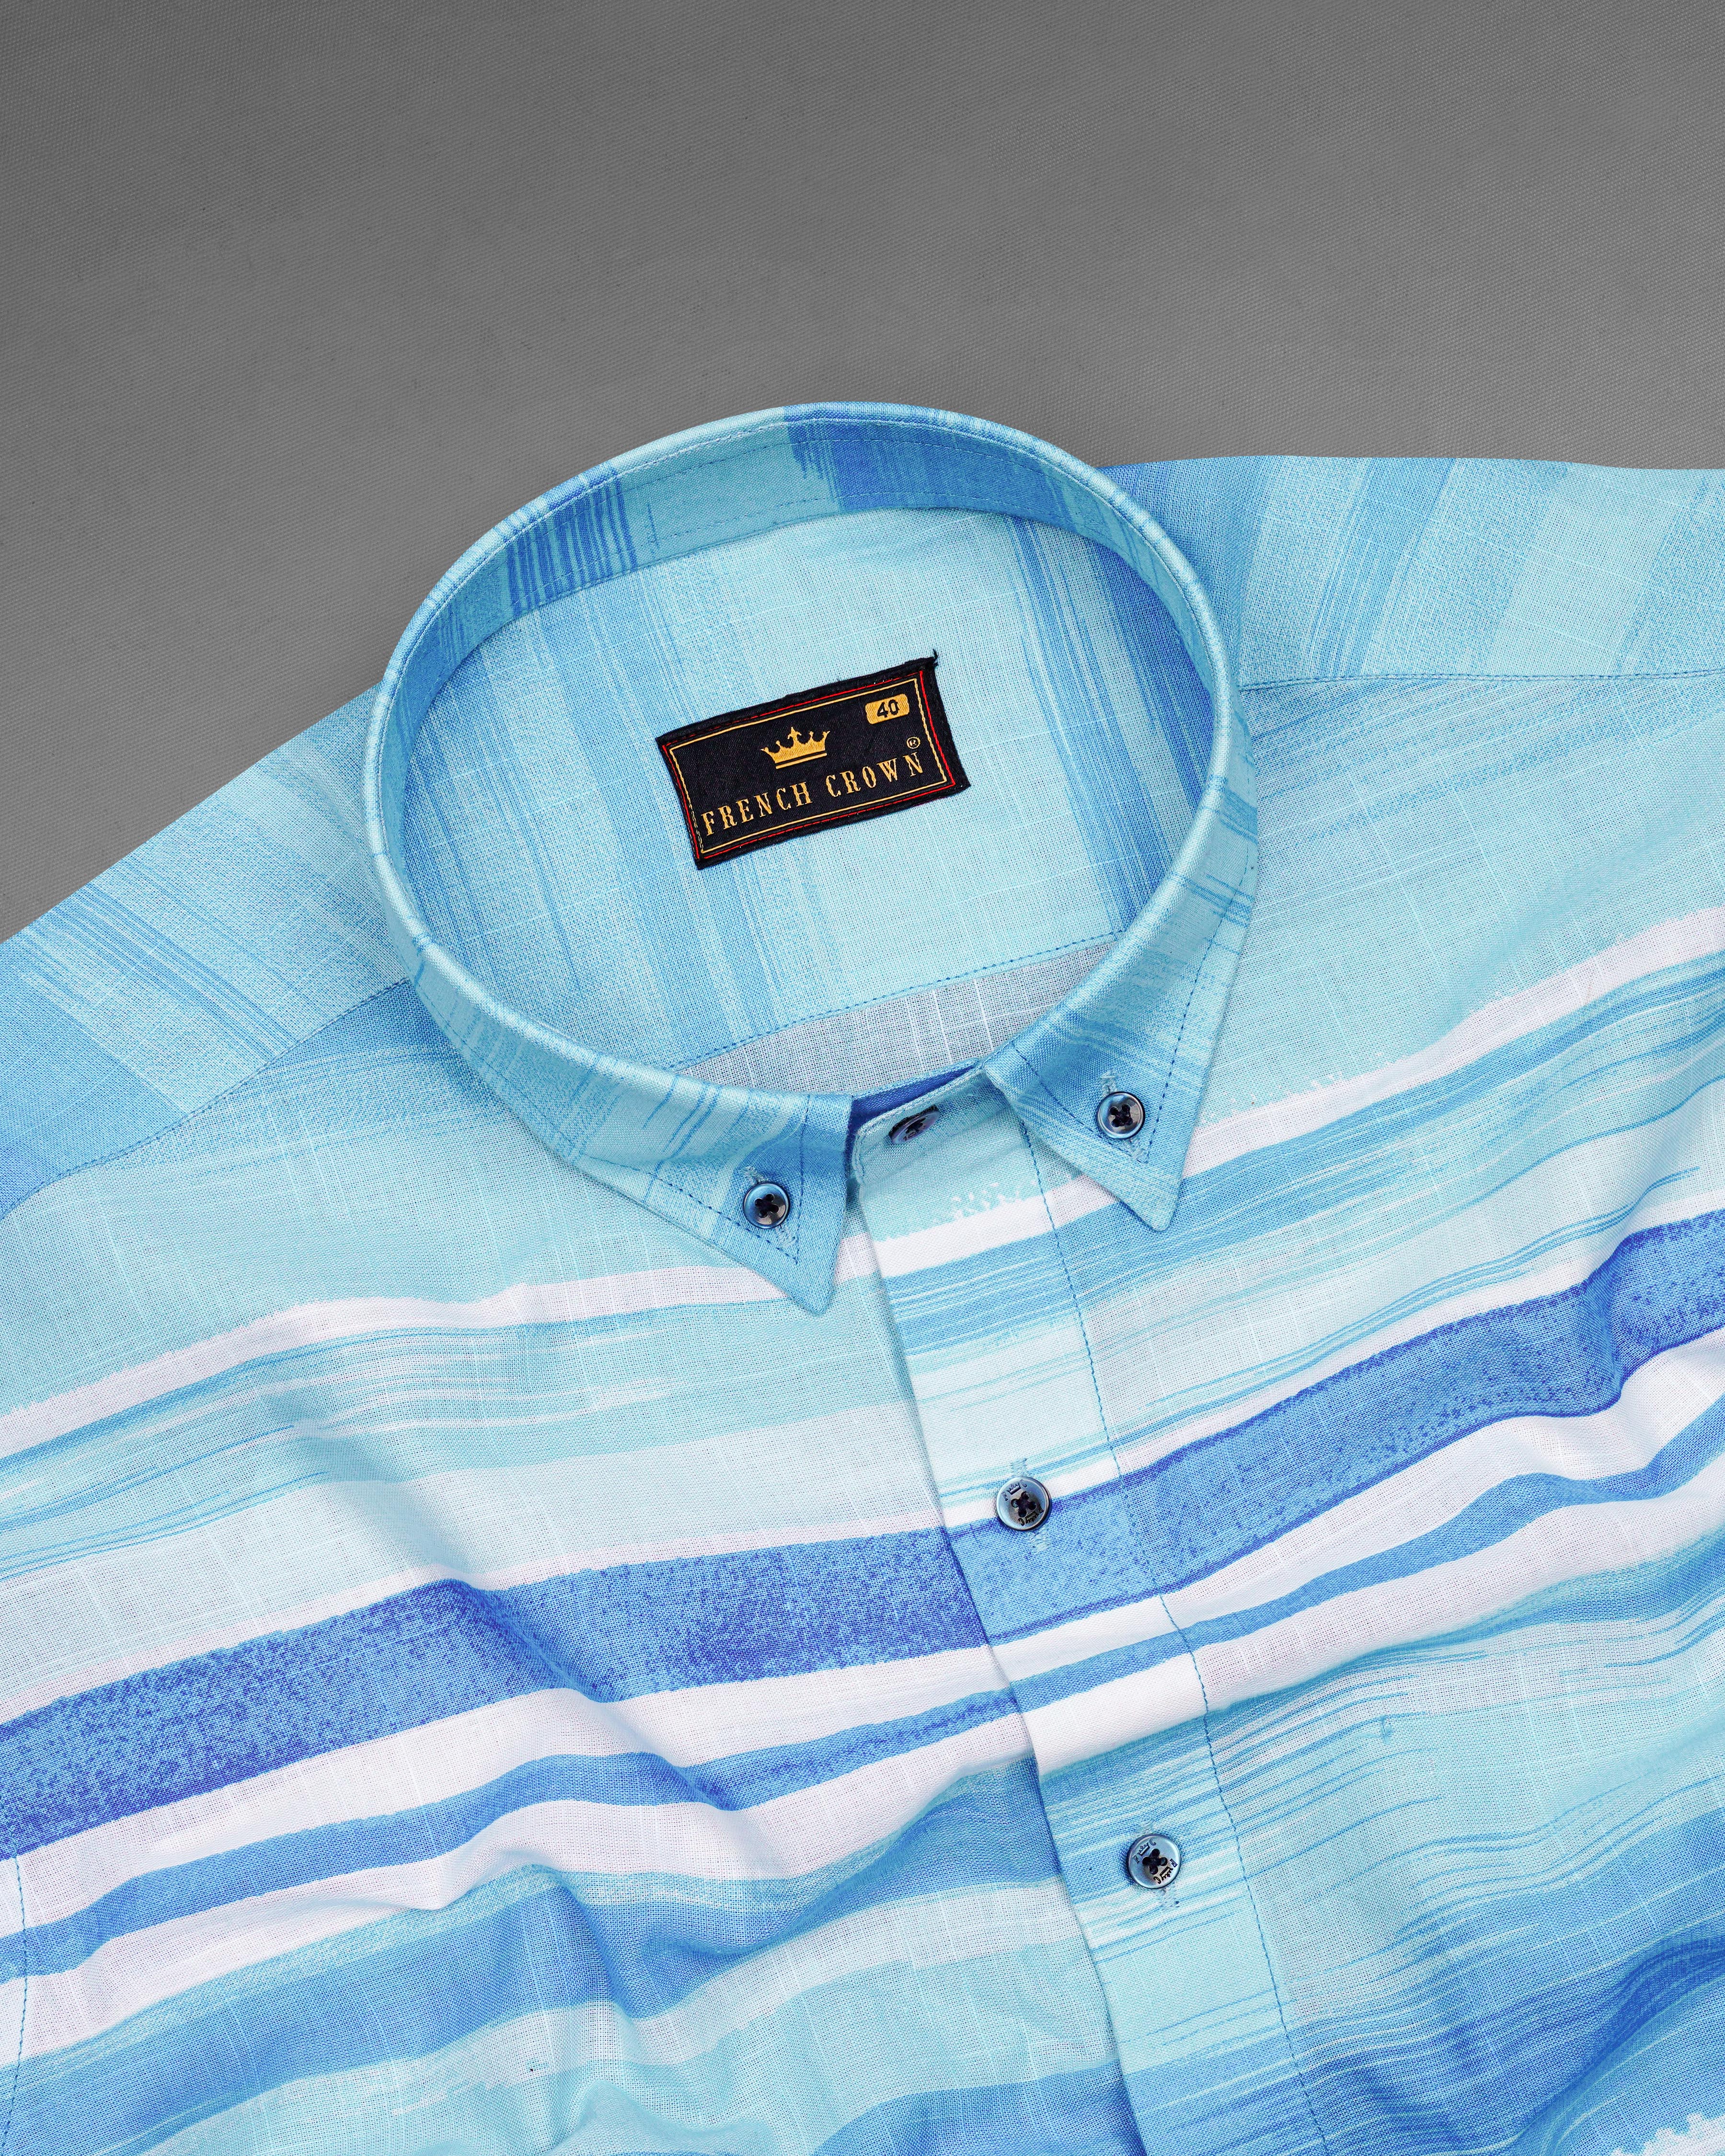 Crystal Sky Blue with Muted Blue Striped Premium Cotton Shirt 8468-BD-BLE-38,8468-BD-BLE-H-38,8468-BD-BLE-9,8468-BD-BLE-9,8468-BD-BLE-40,8468-BD-BLE-H-40,8468-BD-BLE-2,8468-BD-BLE-2,8468-BD-BLE-4,8468-BD-BLE-4,8468-BD-BLE-6,8468-BD-BLE-6,8468-BD-BLE-8,8468-BD-BLE-8,8468-BD-BLE-50,8468-BD-BLE-H-50,8468-BD-BLE-2,8468-BD-BLE-2